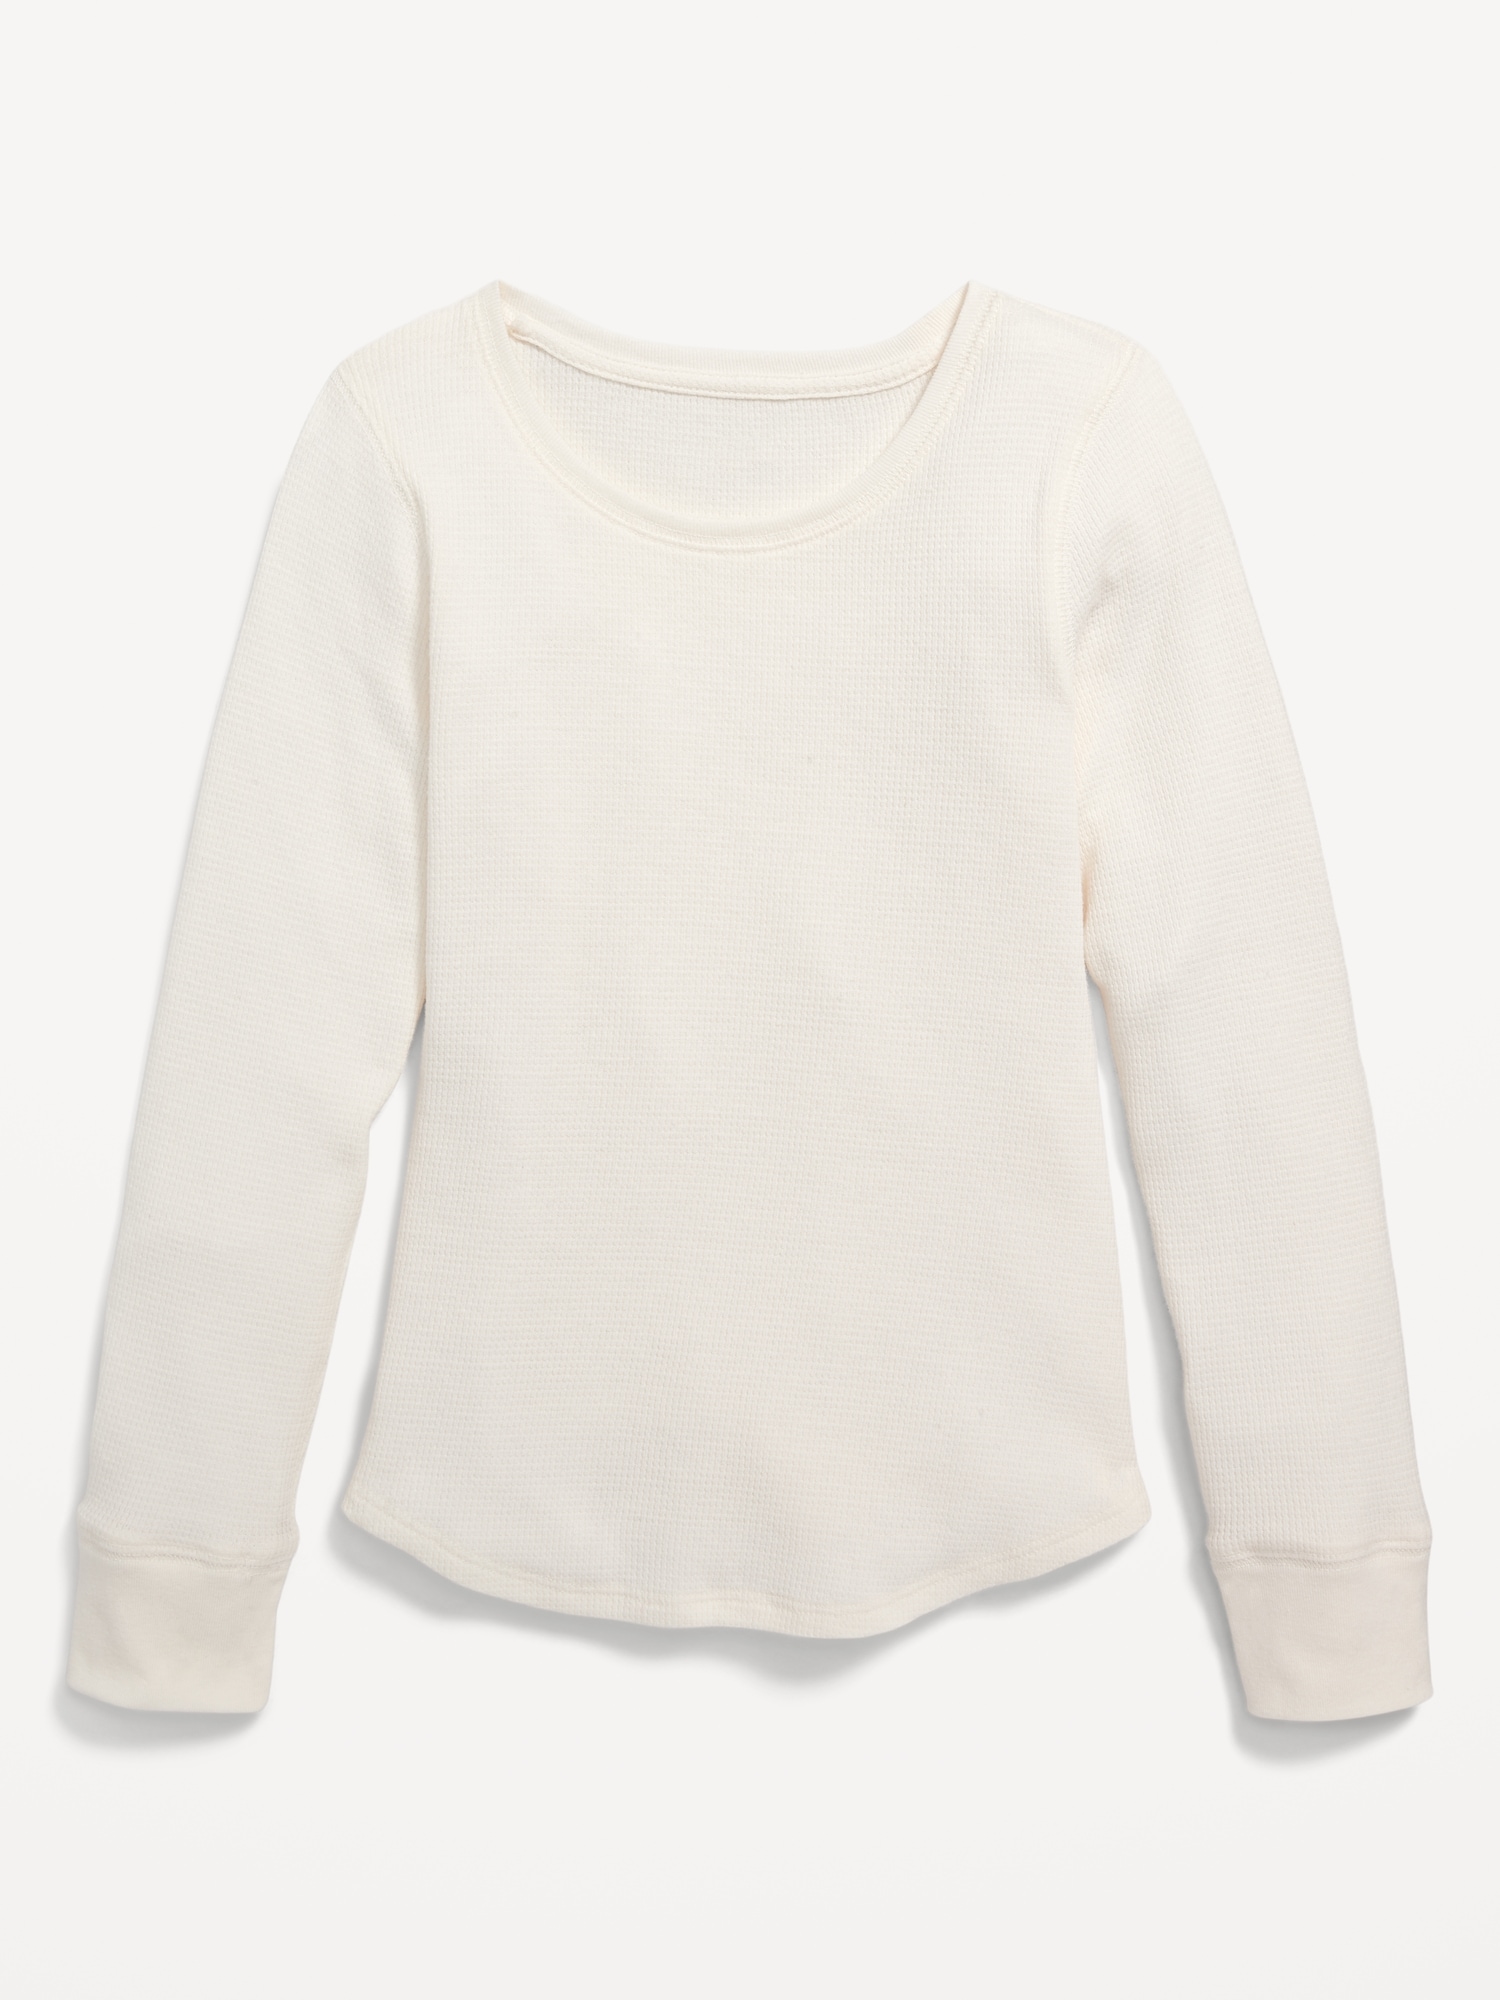 Long-Sleeve Solid Thermal-Knit T-Shirt for Girls